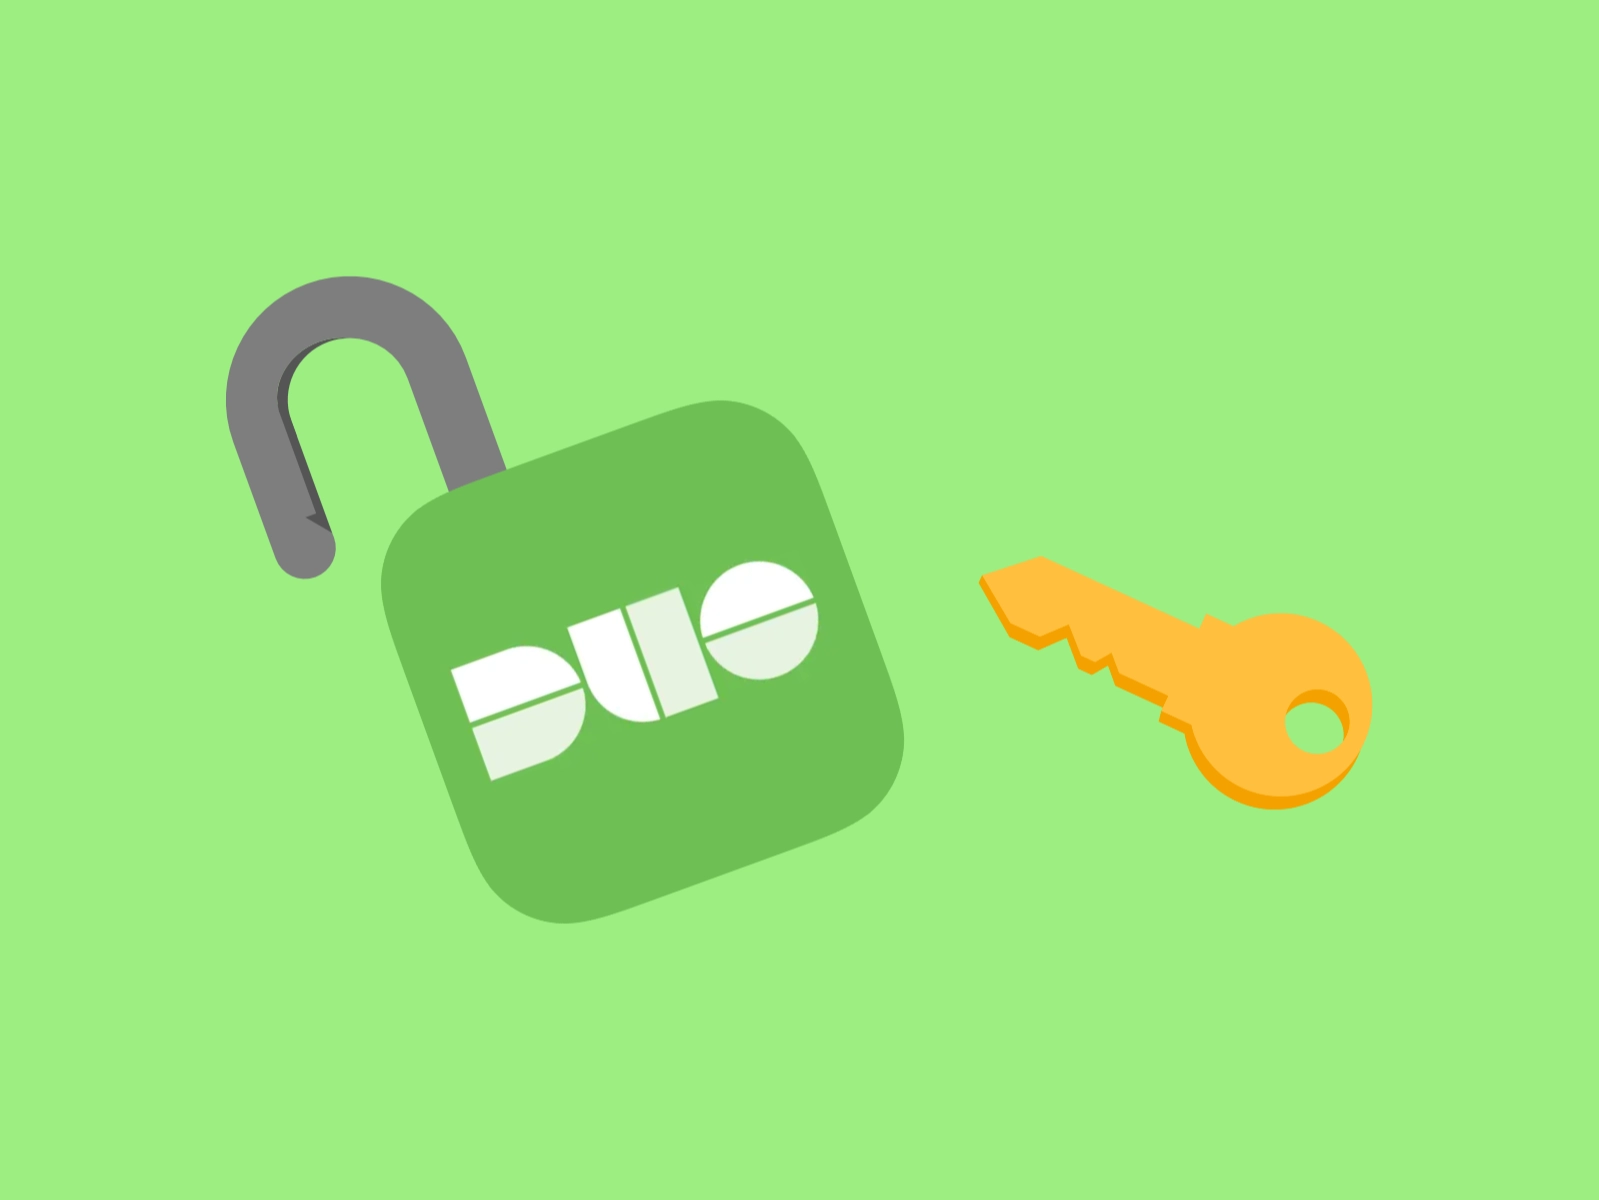 Illustration of DUO Mobile lock being opened by a key